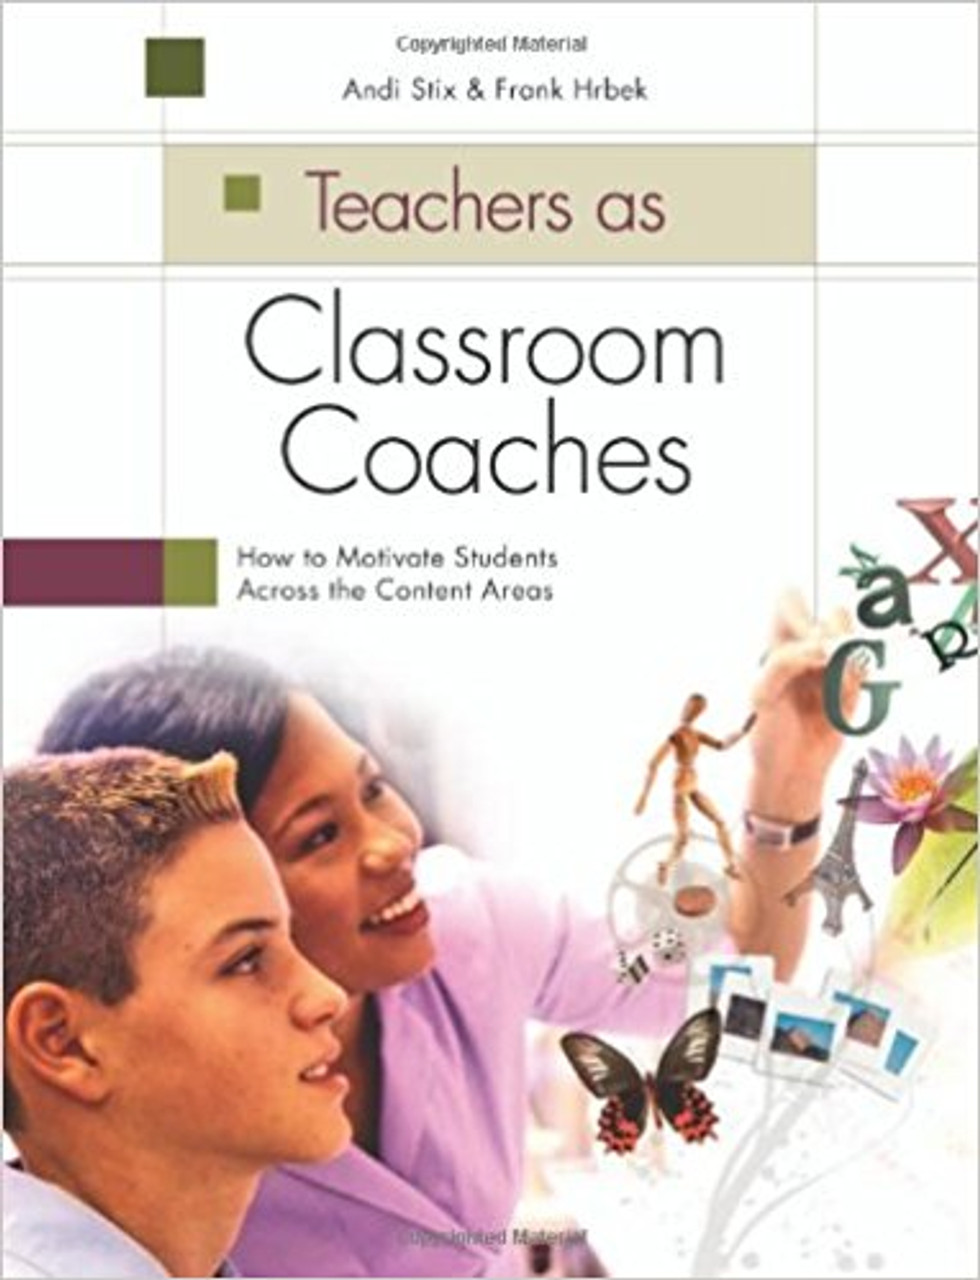 One of the hardest things for teachers to do is to inspire their students. In this groundbreaking book, authors Andi Stix and Frank Hrbek show teachers how to do just that by adapting proven coaching strategies in class.